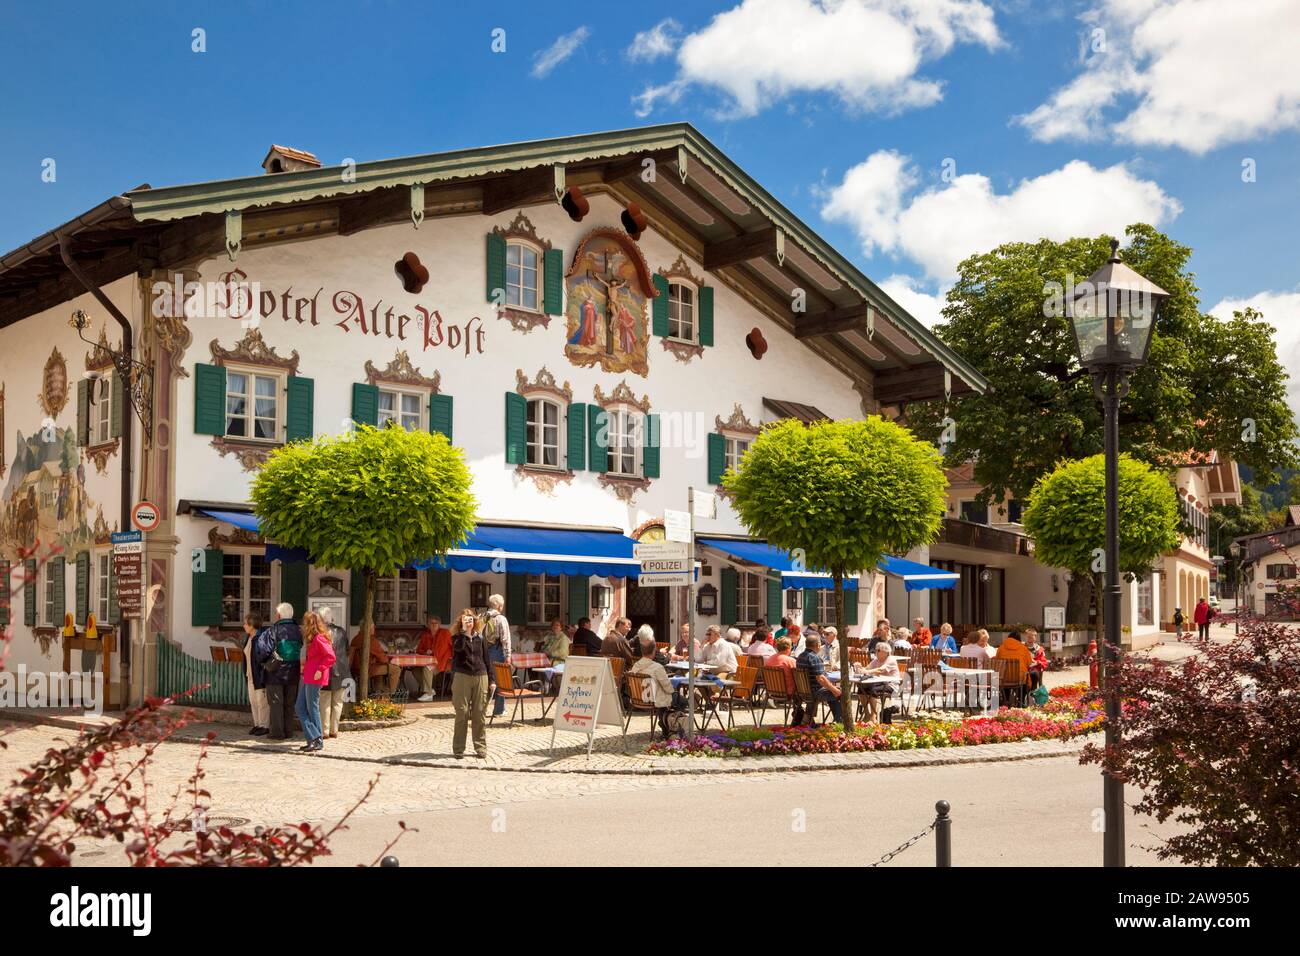 Oberammergau street scene with people at a pavement cafe, Bavaria, Germany in summer Stock Photo